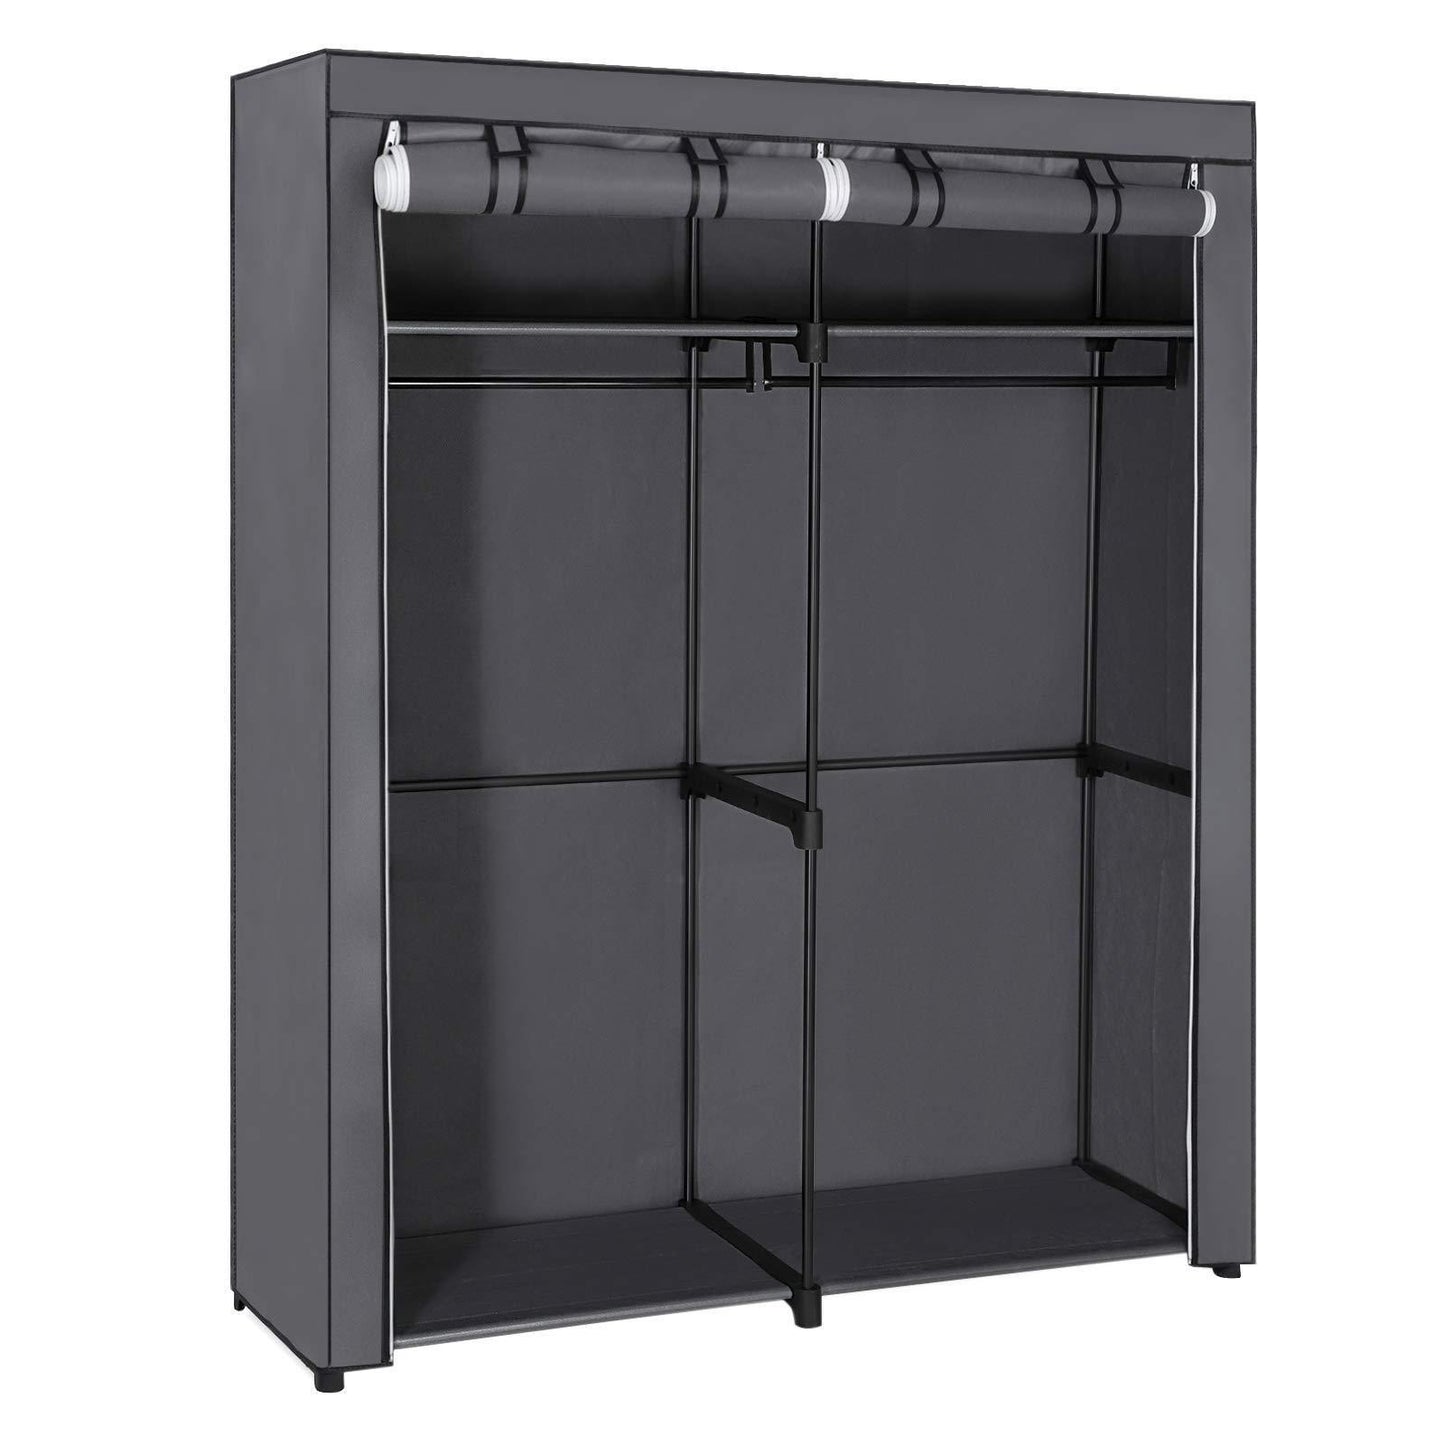 Organize with songmics closet storage organizer portable wardrobe with hanging rods clothes rack foldable cloakroom study stable 55 1 x 16 9 x 68 5 inches gray uryg02gy